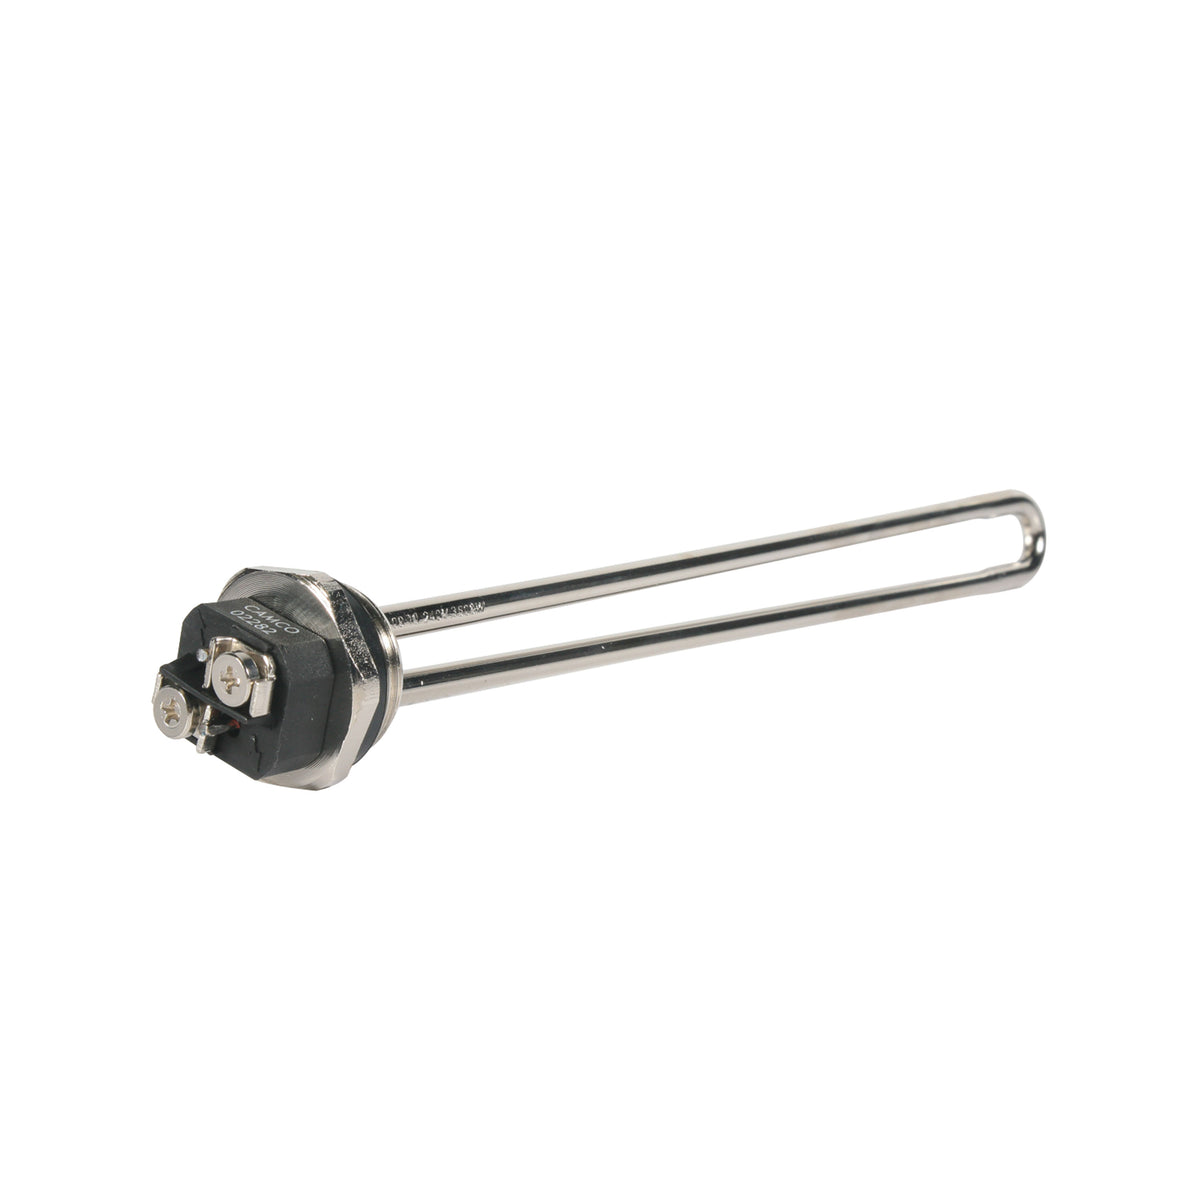 Camco 02283 Screw-In Immersion Element - 240V/3500W